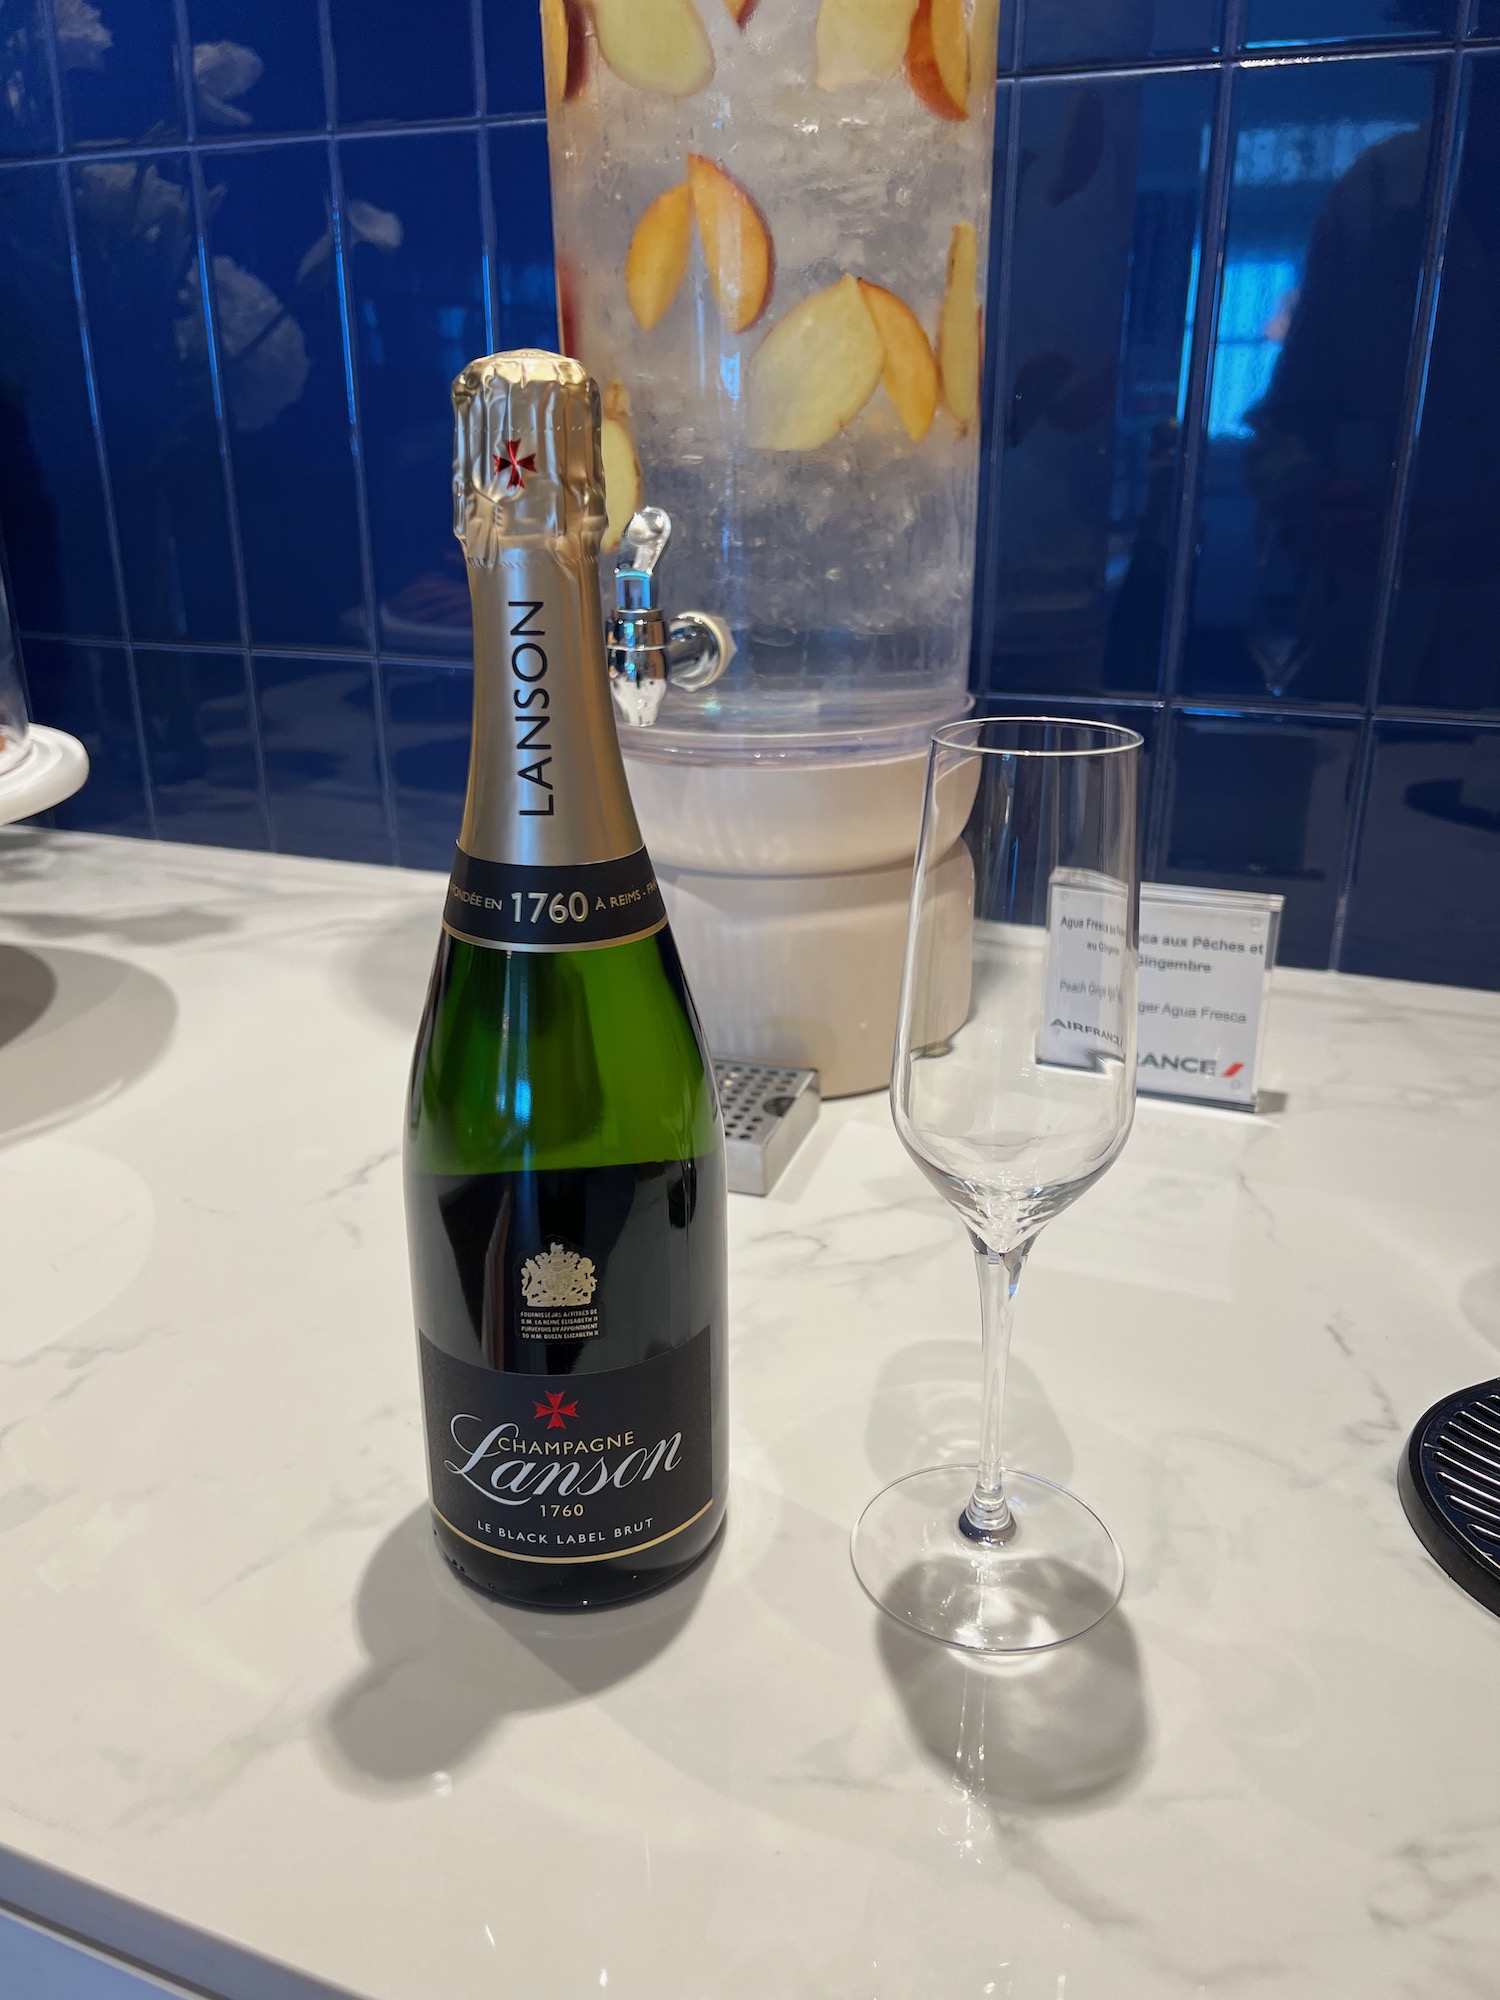 a bottle of champagne next to a glass of water